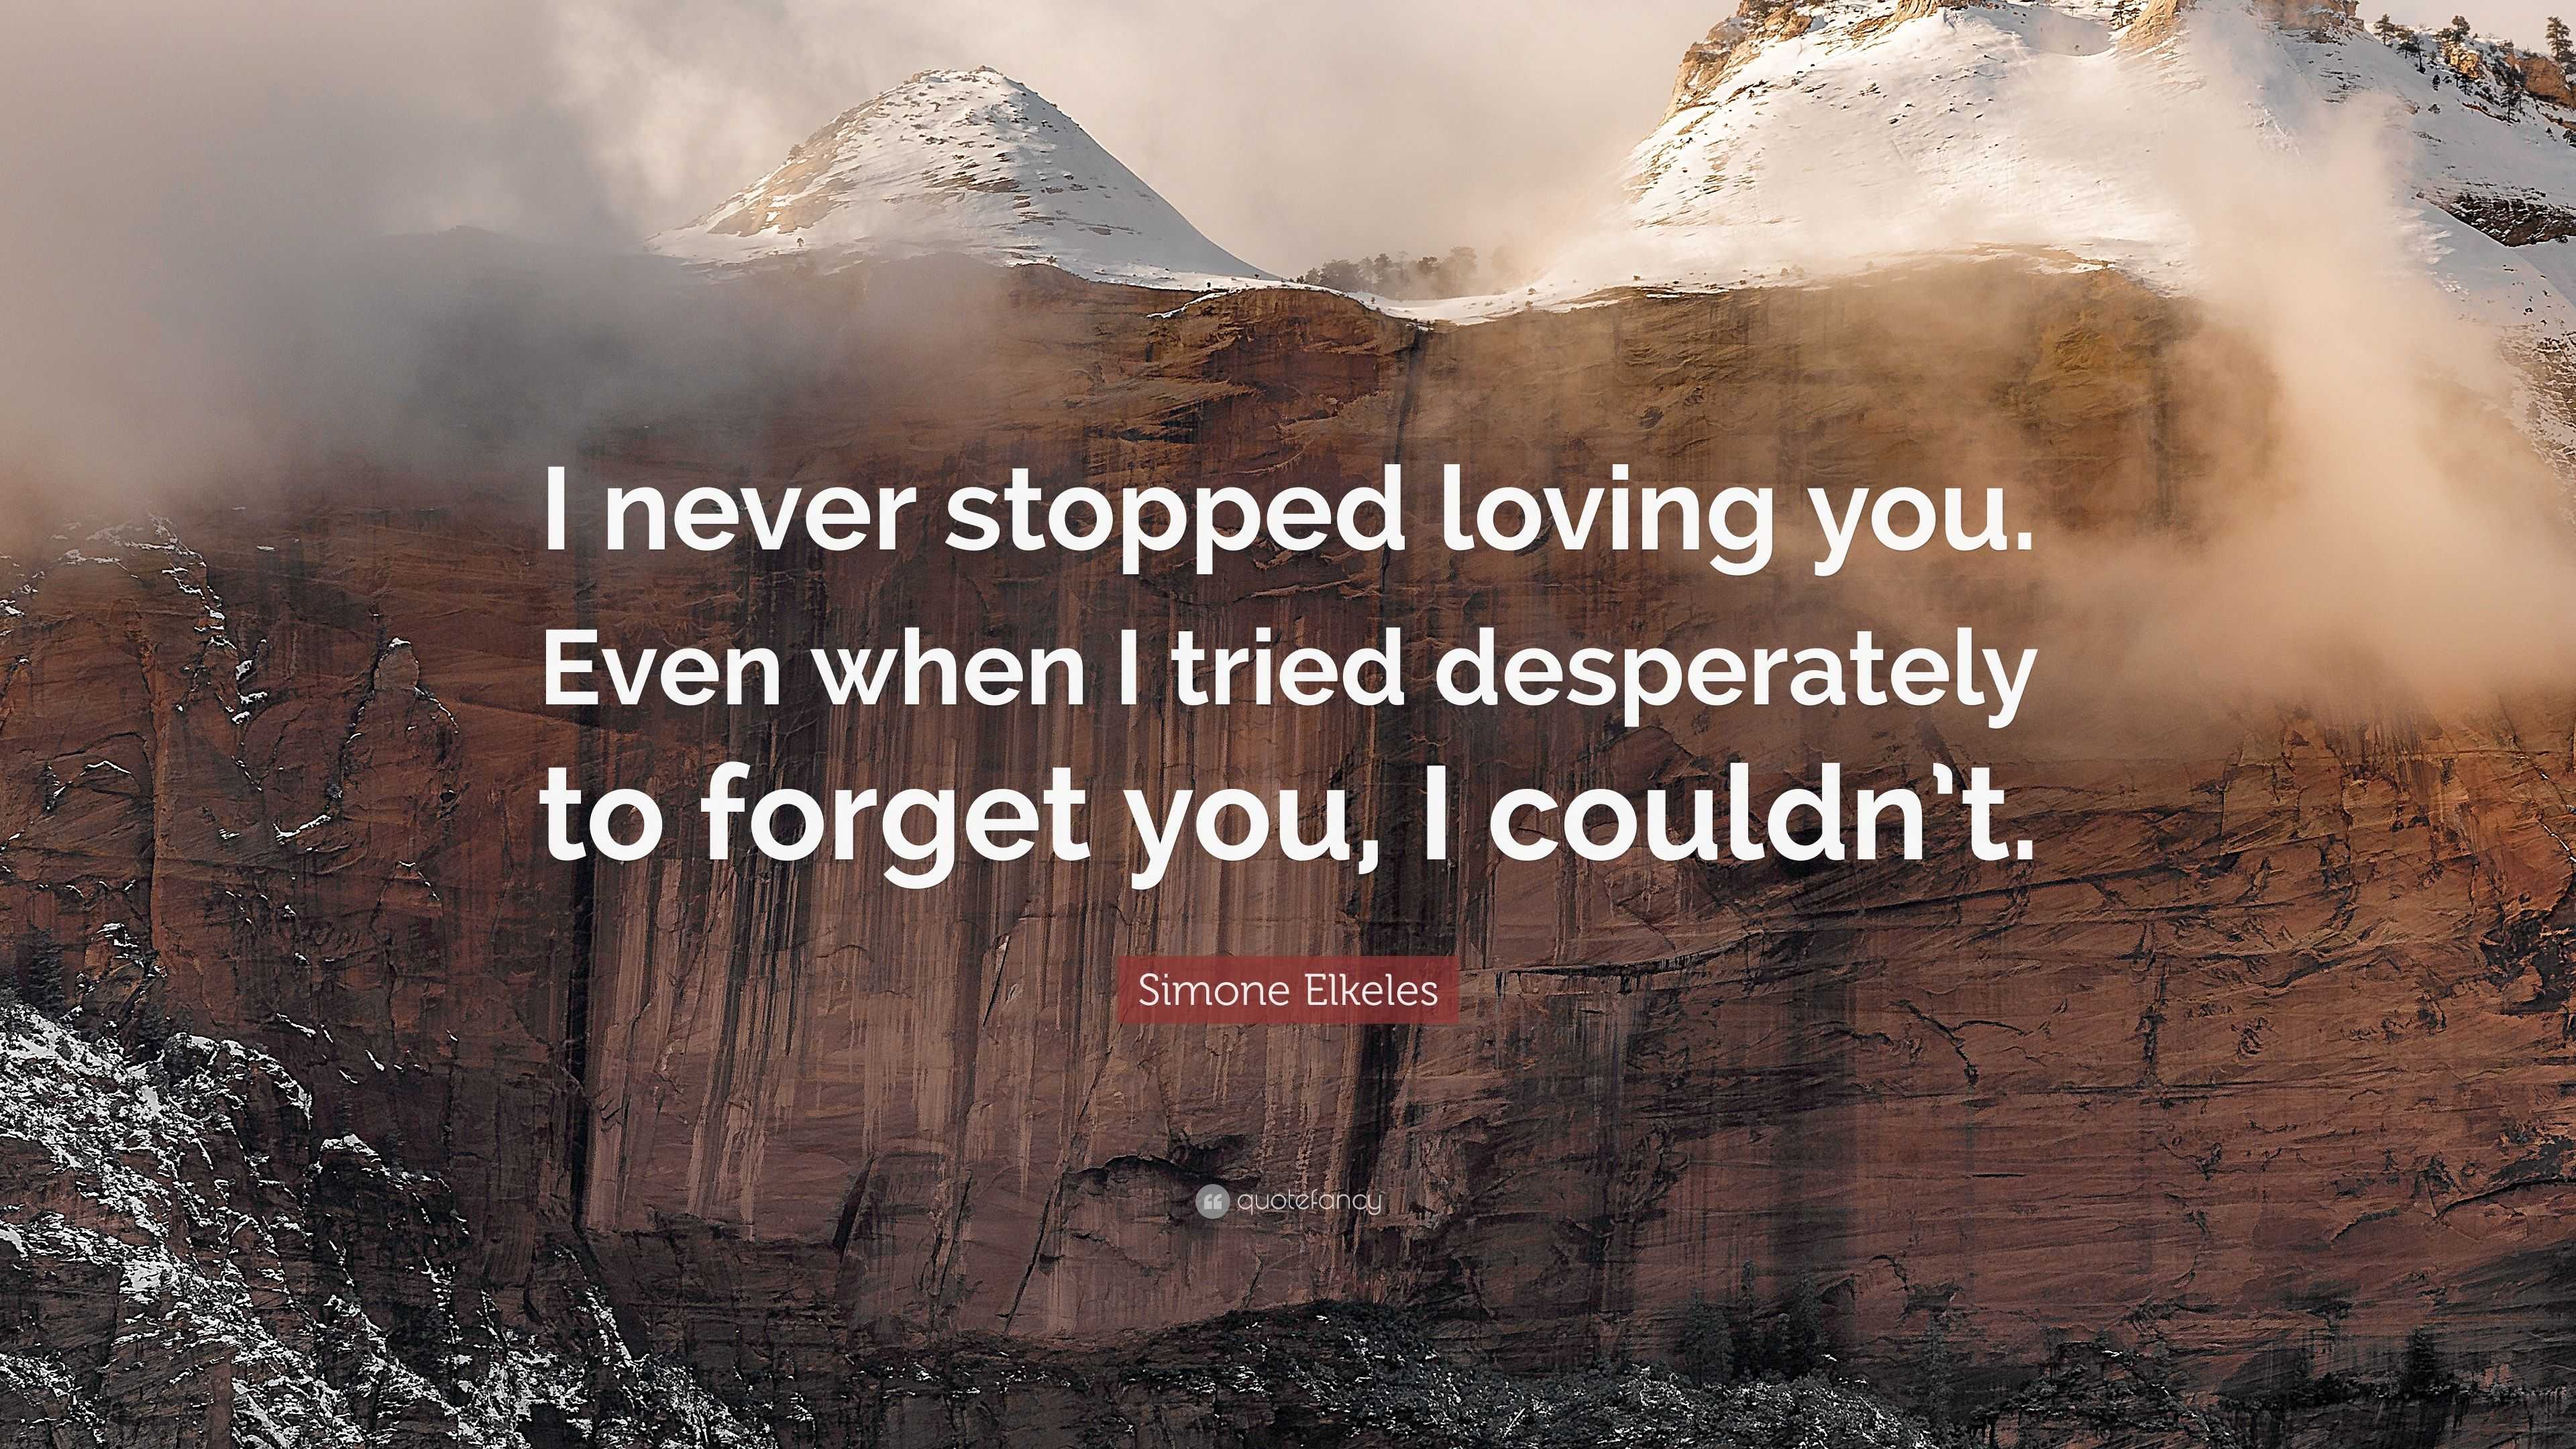 Simone Elkeles Quote “I never stopped loving you Even when I tried desperately